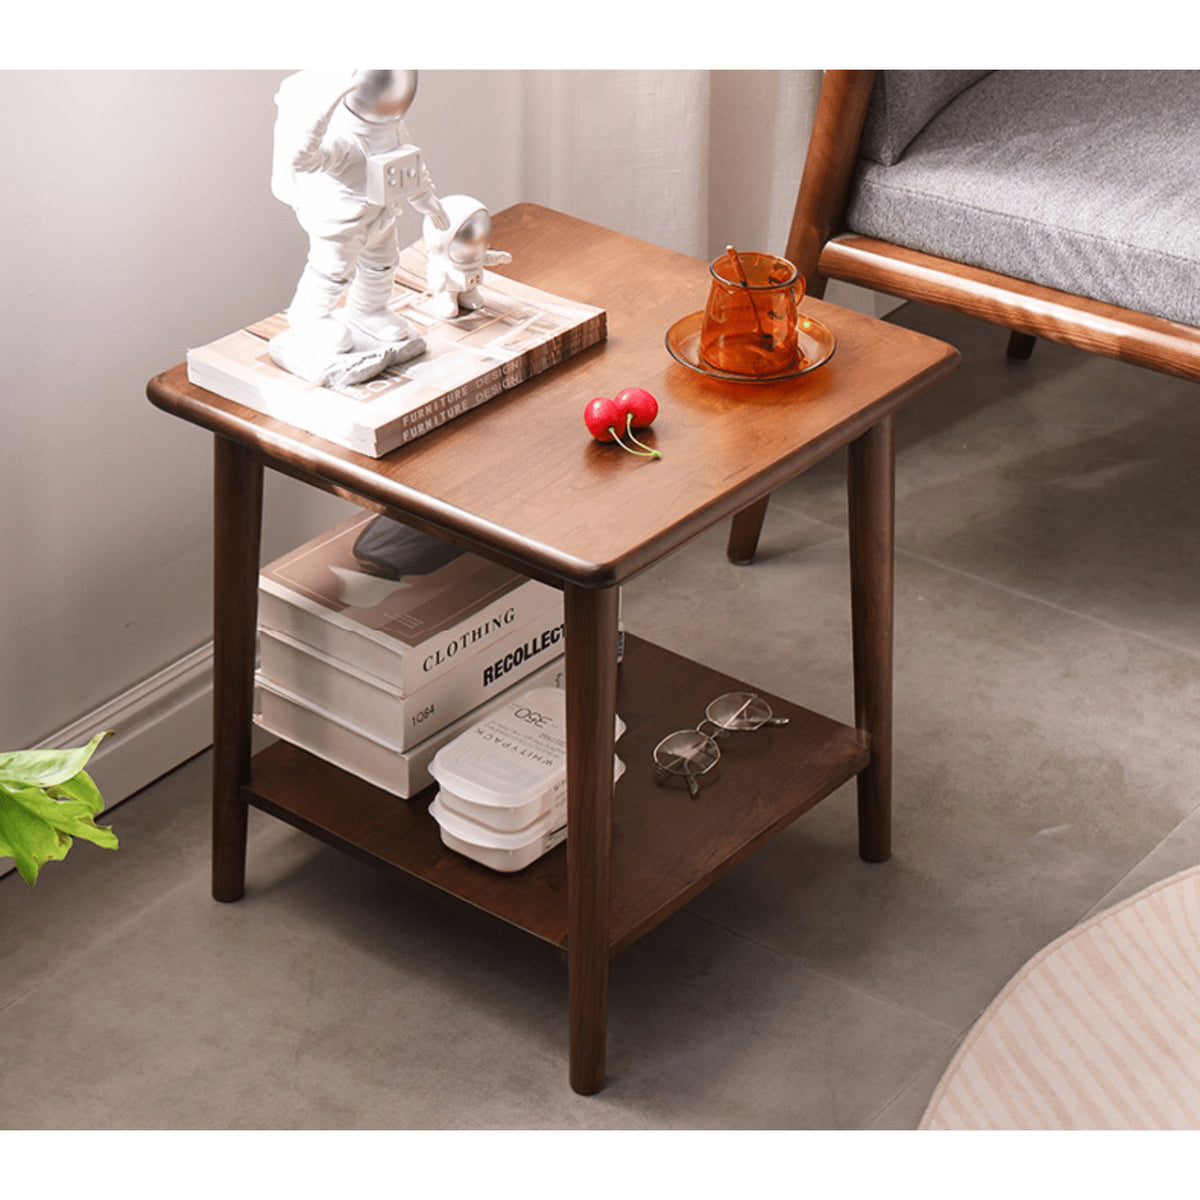 Stunning Brown Tung Wood Tea Table - Elegant Design for Your Living Room Decor hym-491